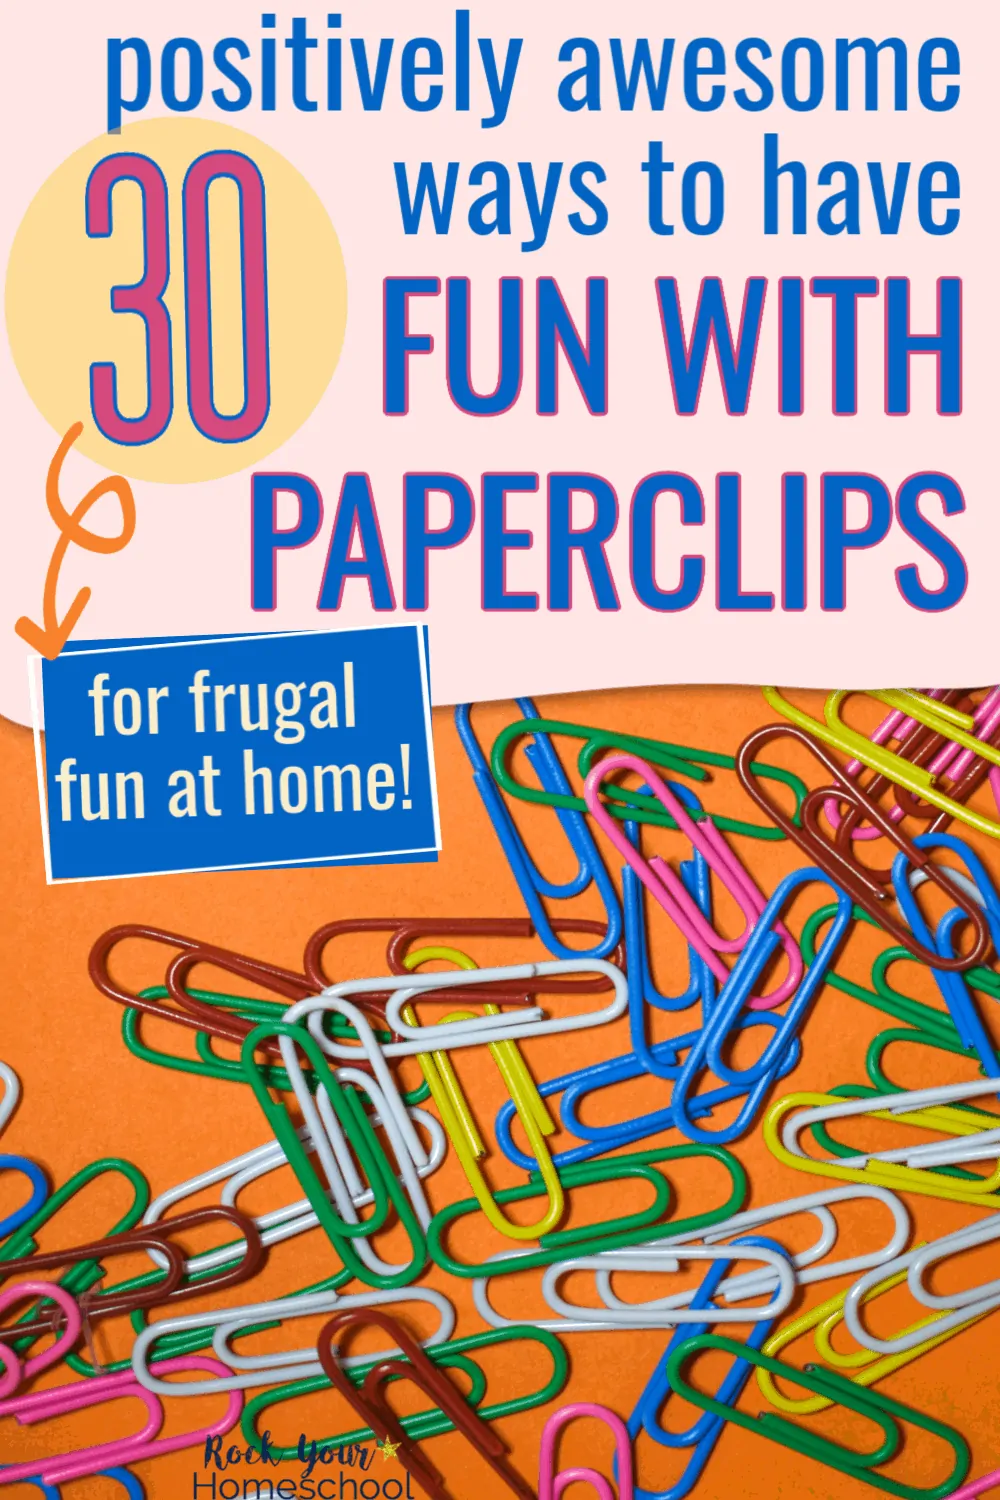 30 Positively Amazing Ways to Have Frugal Fun with Paperclips